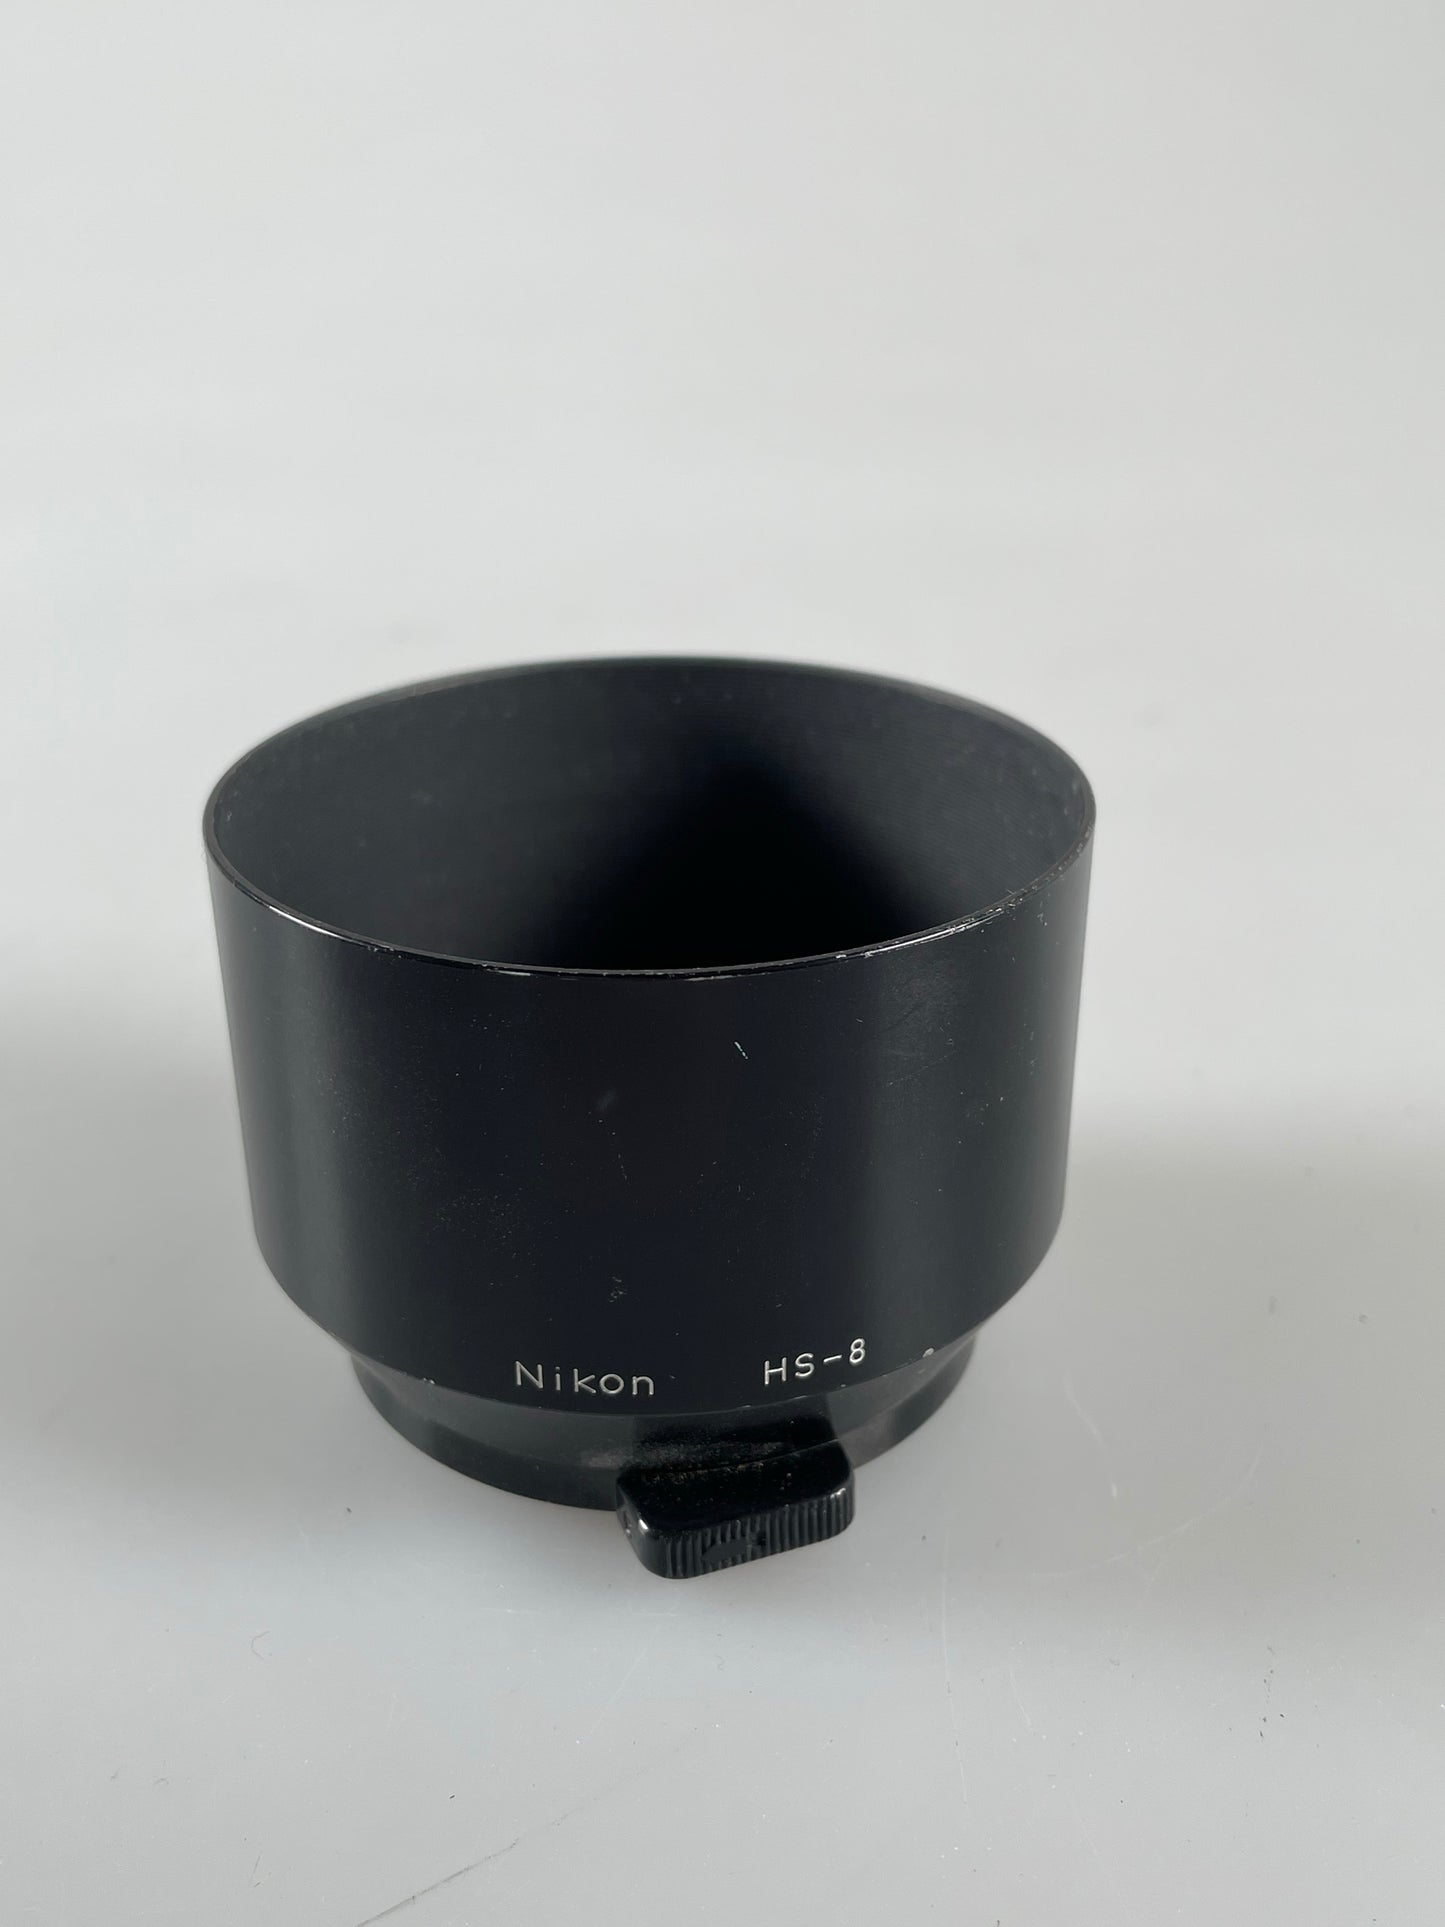 Nikon HS-8 Lens Hood Shade (52mm Snap-On) for 85mm f2, 105mm f2.5